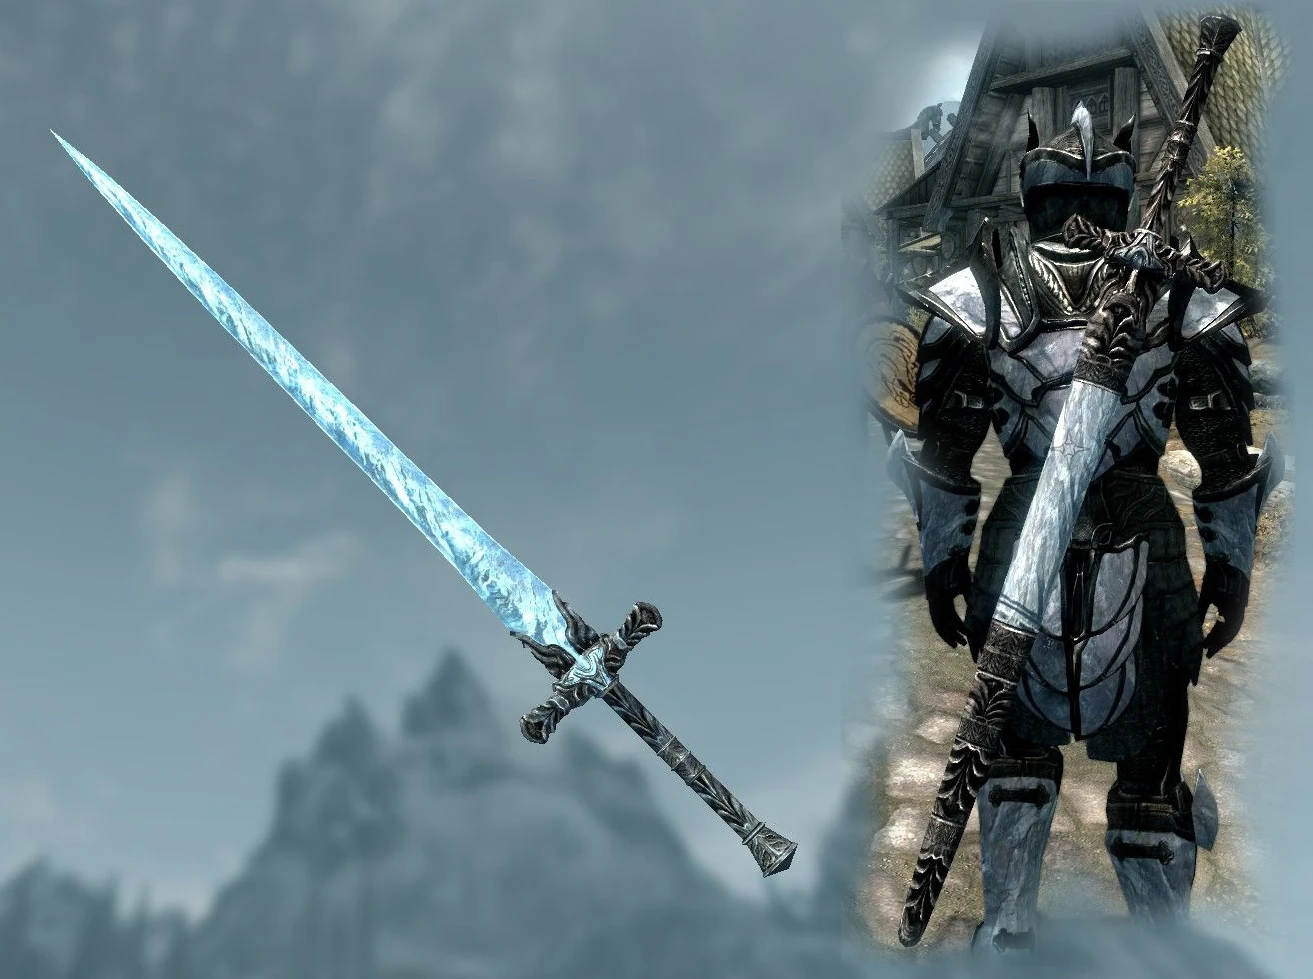 Stalhrim Greatsword with Scabbard. 